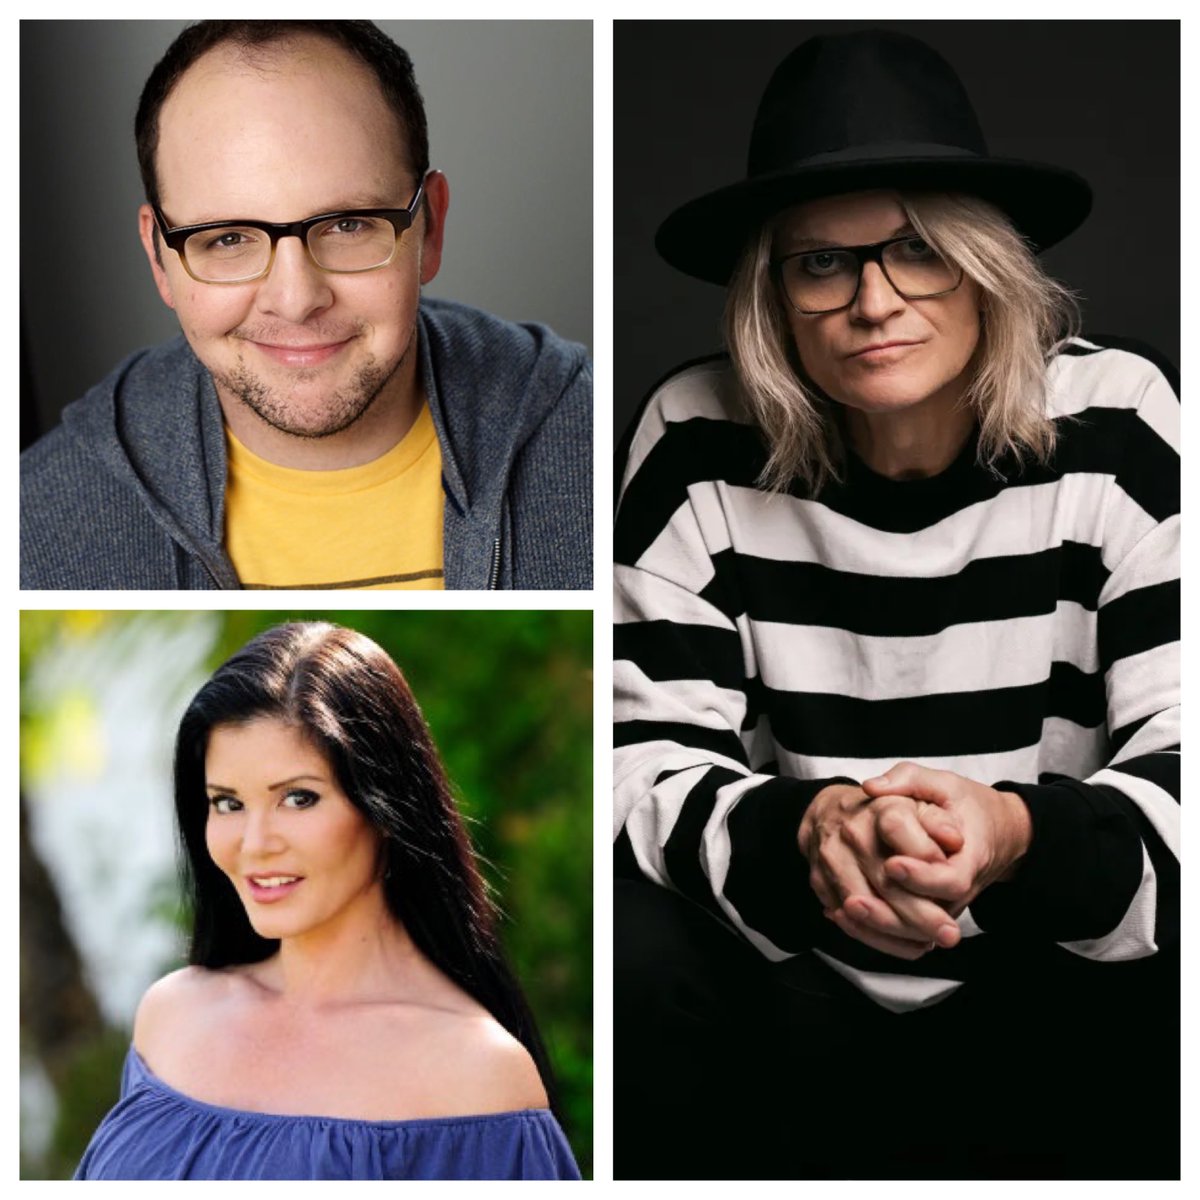 #Podcast 306 features guests @CrushEconoline singer Trevor @Hurst_Team, physician / writer / retired @IFBB_Official pro Dr. @StaceyNaito, @MaiselTV #actor @AustinBasis! ecs.page.link/FmjFk